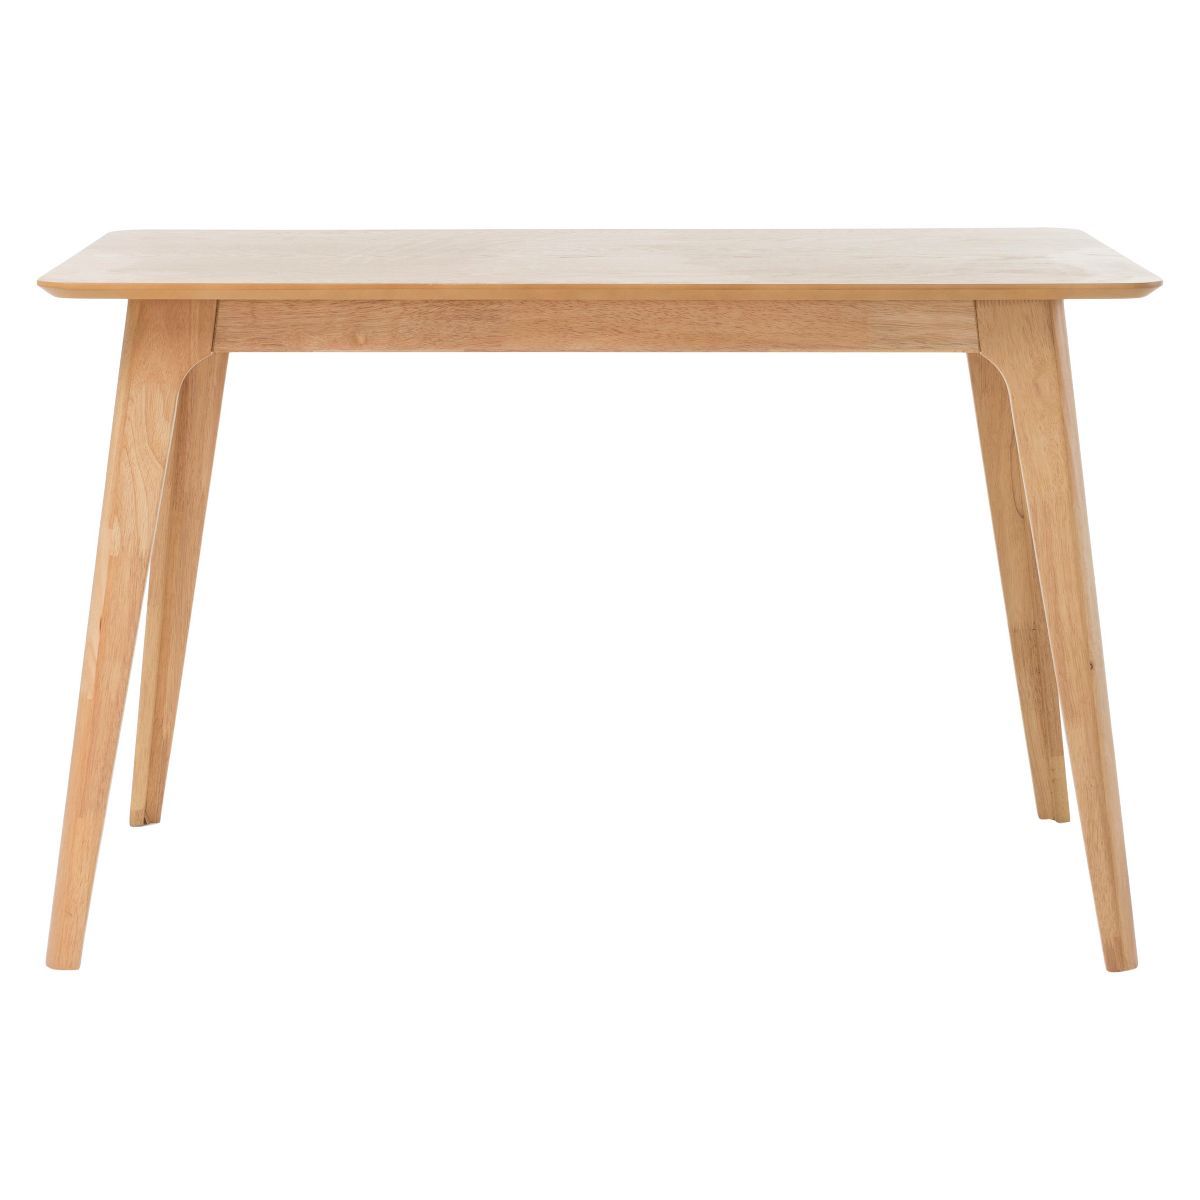 Gideon Dining Table - Christopher Knight Home | Target